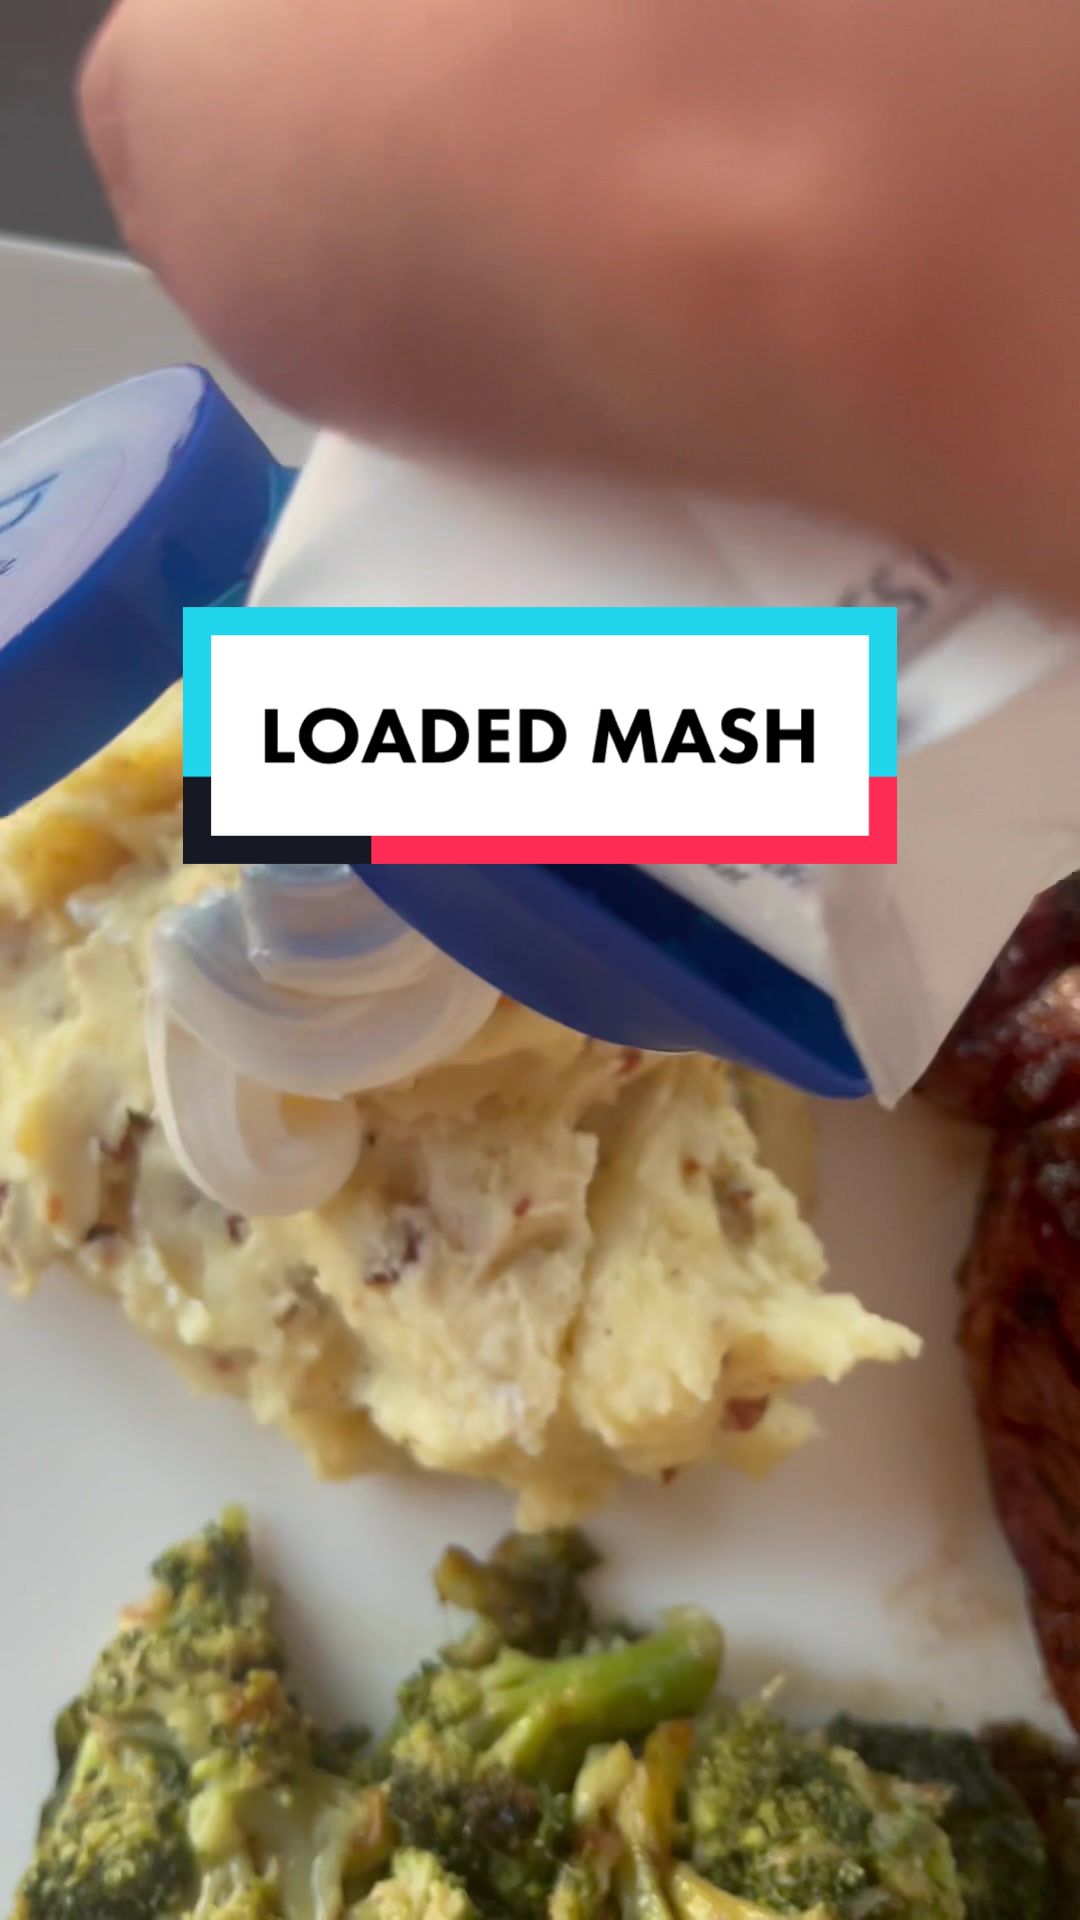 @PERFECT LOADED MASHED POTATOES! LEMME KNOW HOW YOURS TURNED ...